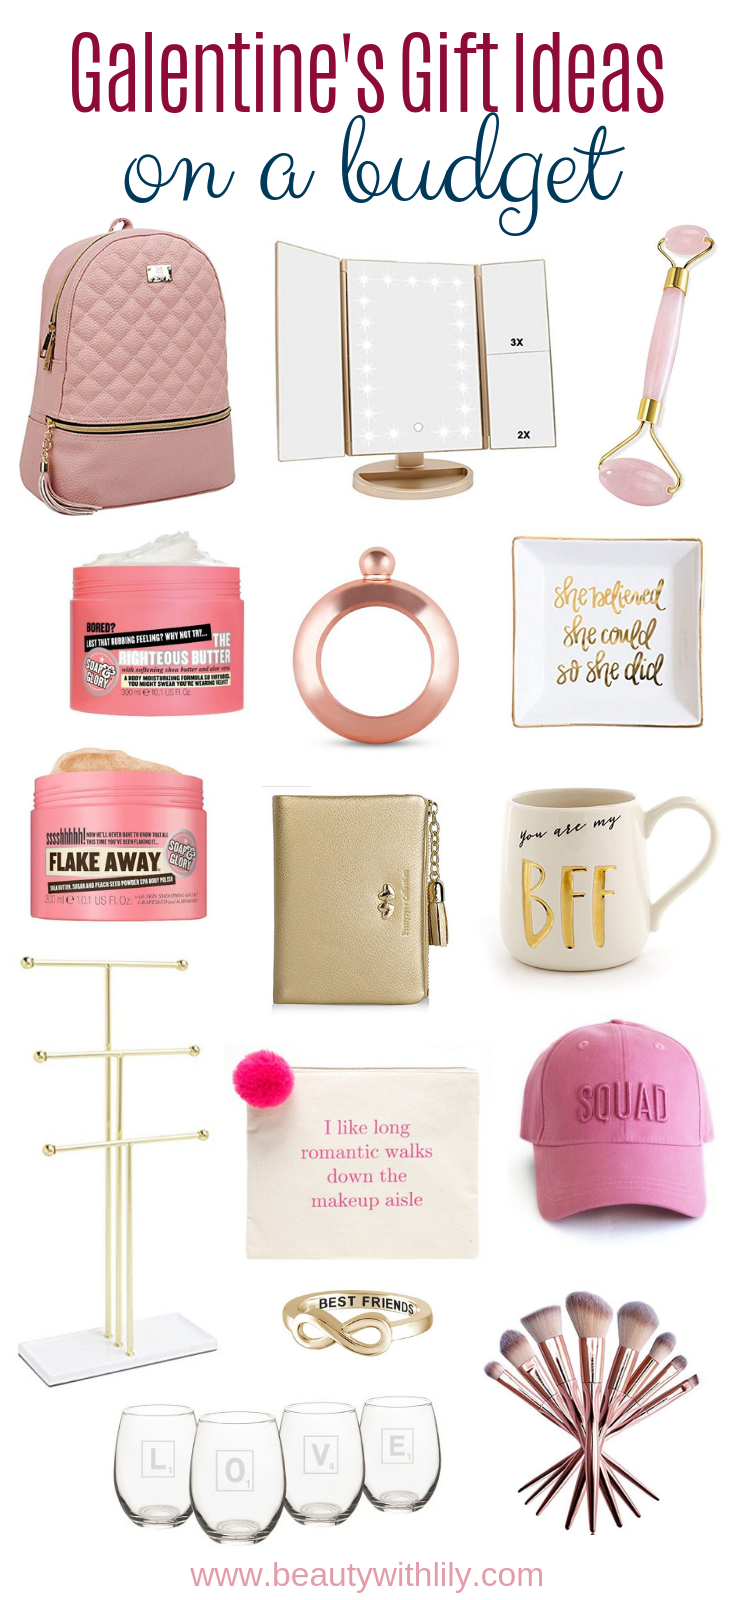 Affordable Galentine's Gift Ideas // Valentine's Day Gift Ideas For Her // Affordable Valentine's Day Gift Ideas // Gift Ideas For Her // Galentine's Day | Beauty With Lily | #valentinesday #giftsforher #galentinesday